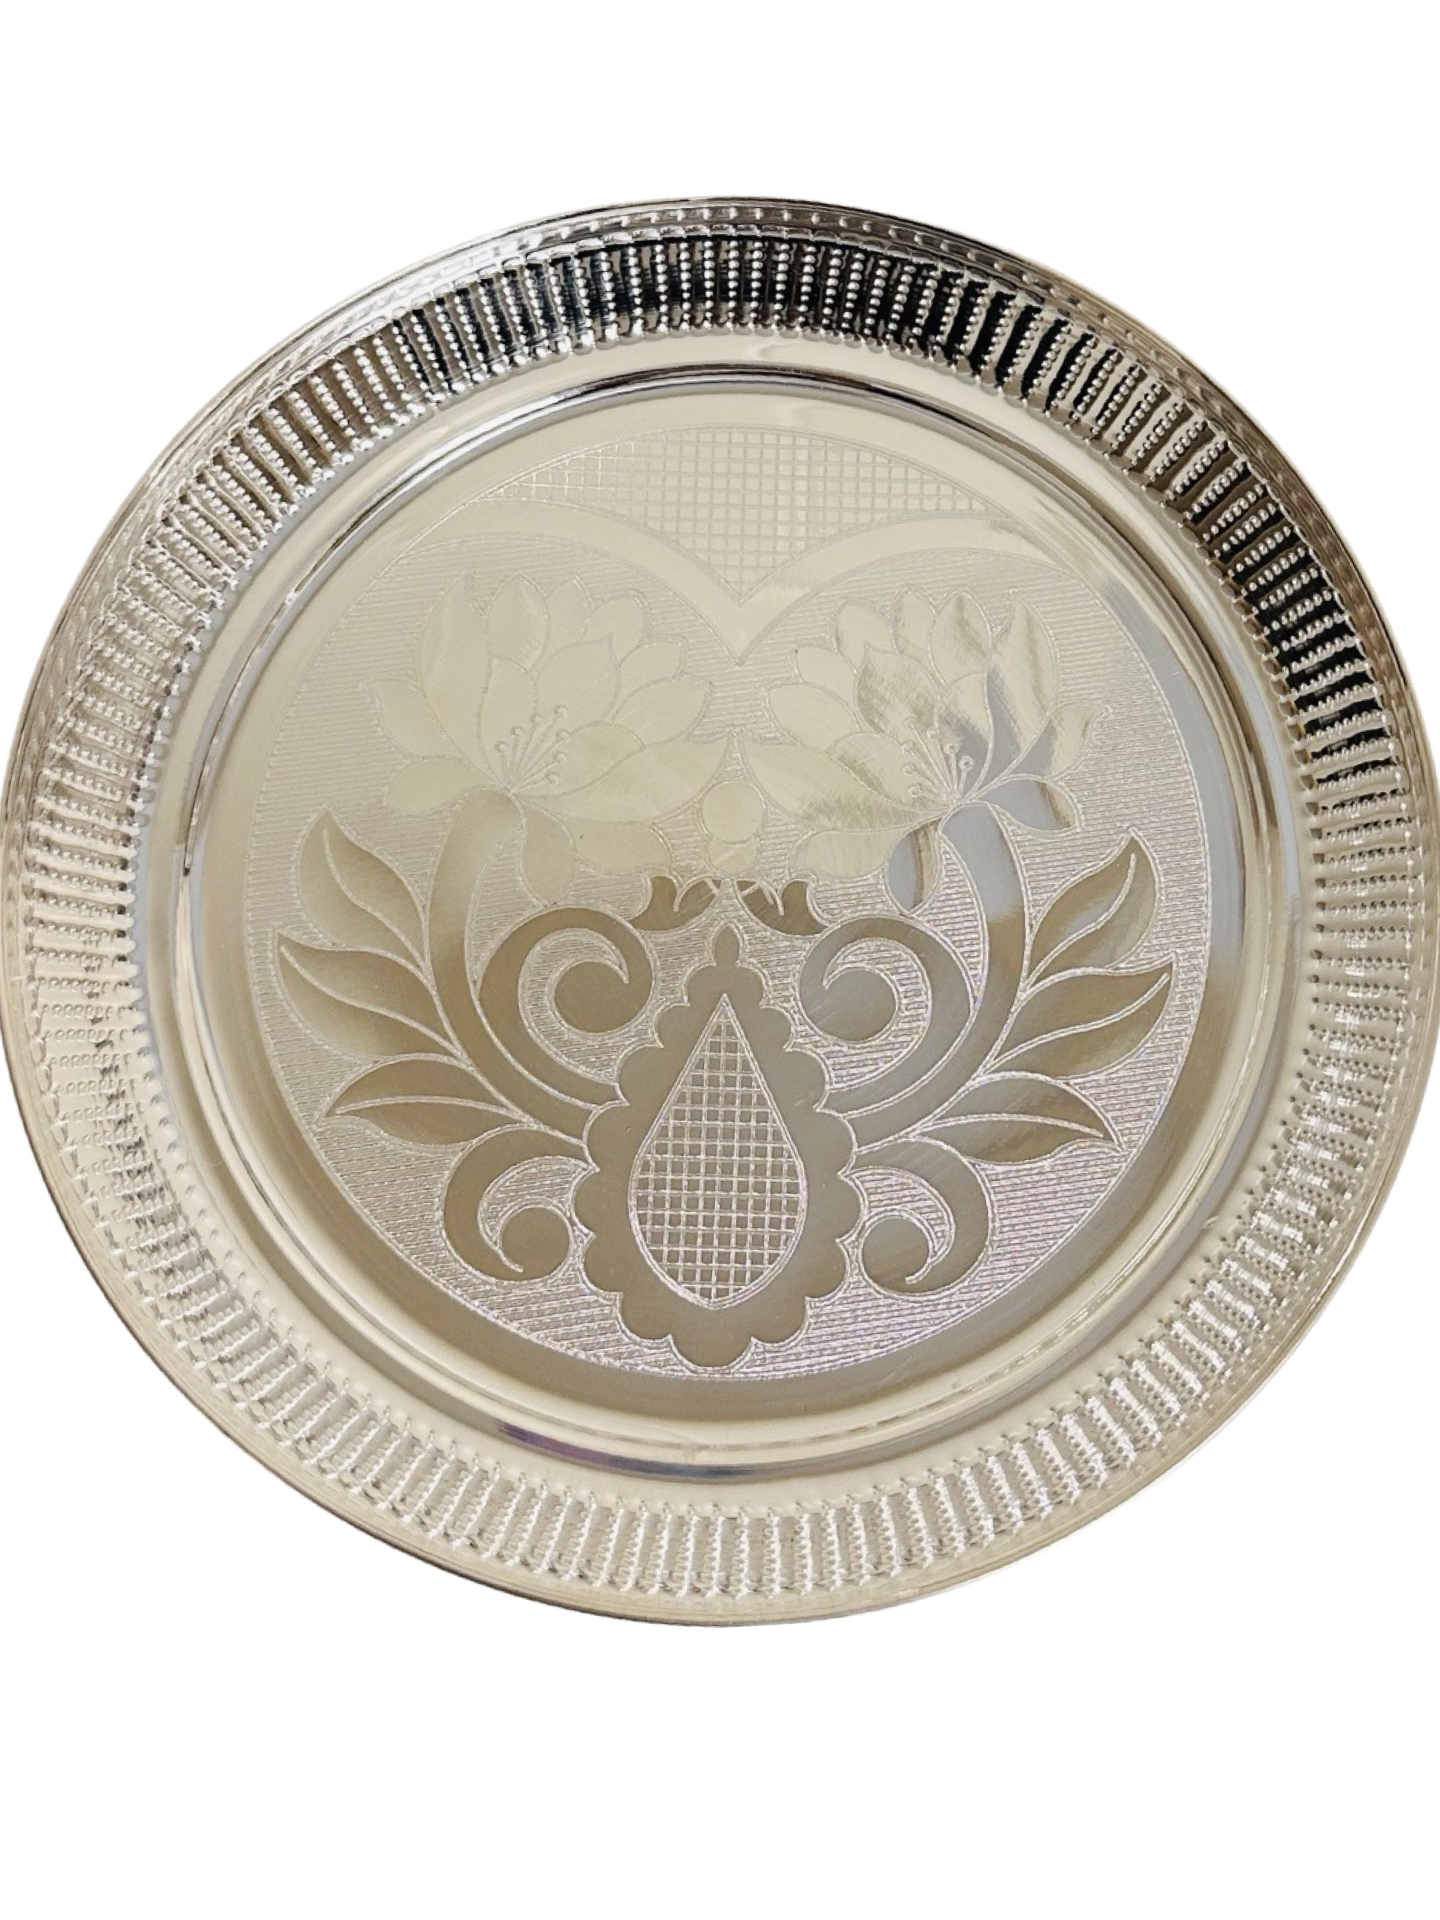 925 Silver Engraved Plate 7.8 inches